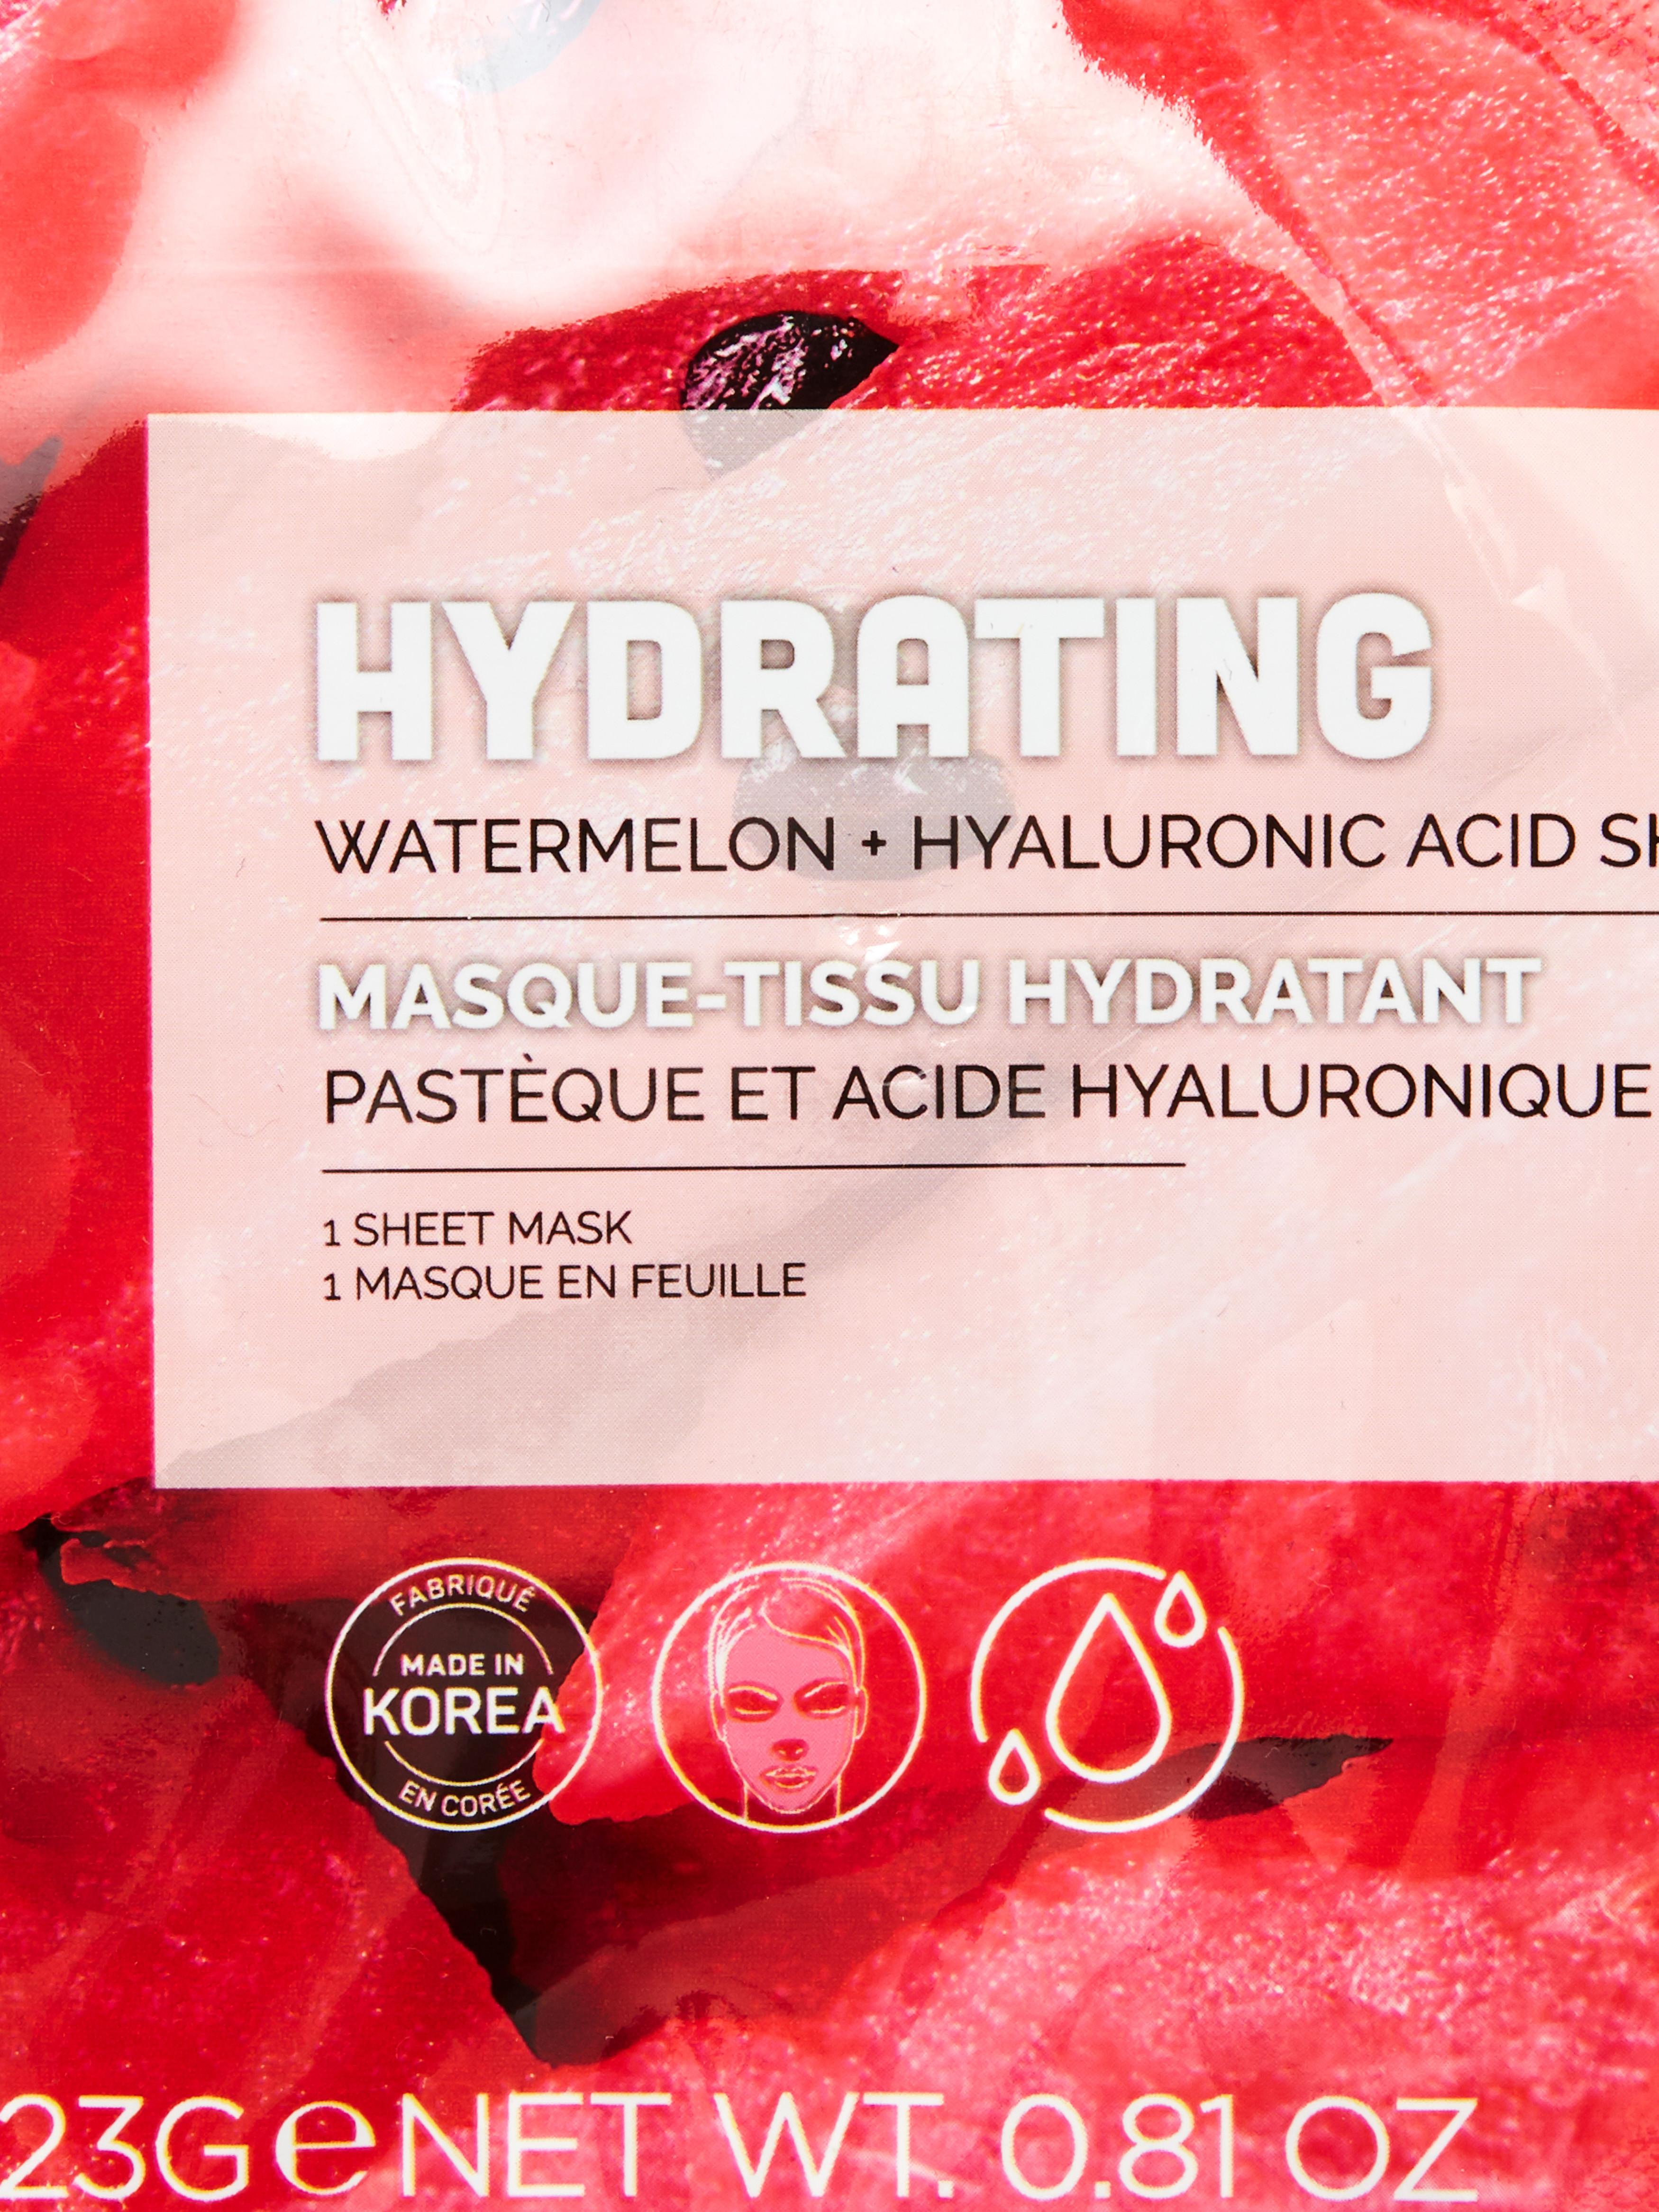 Watermelon and Hyaluronic Acid Sheet Mask